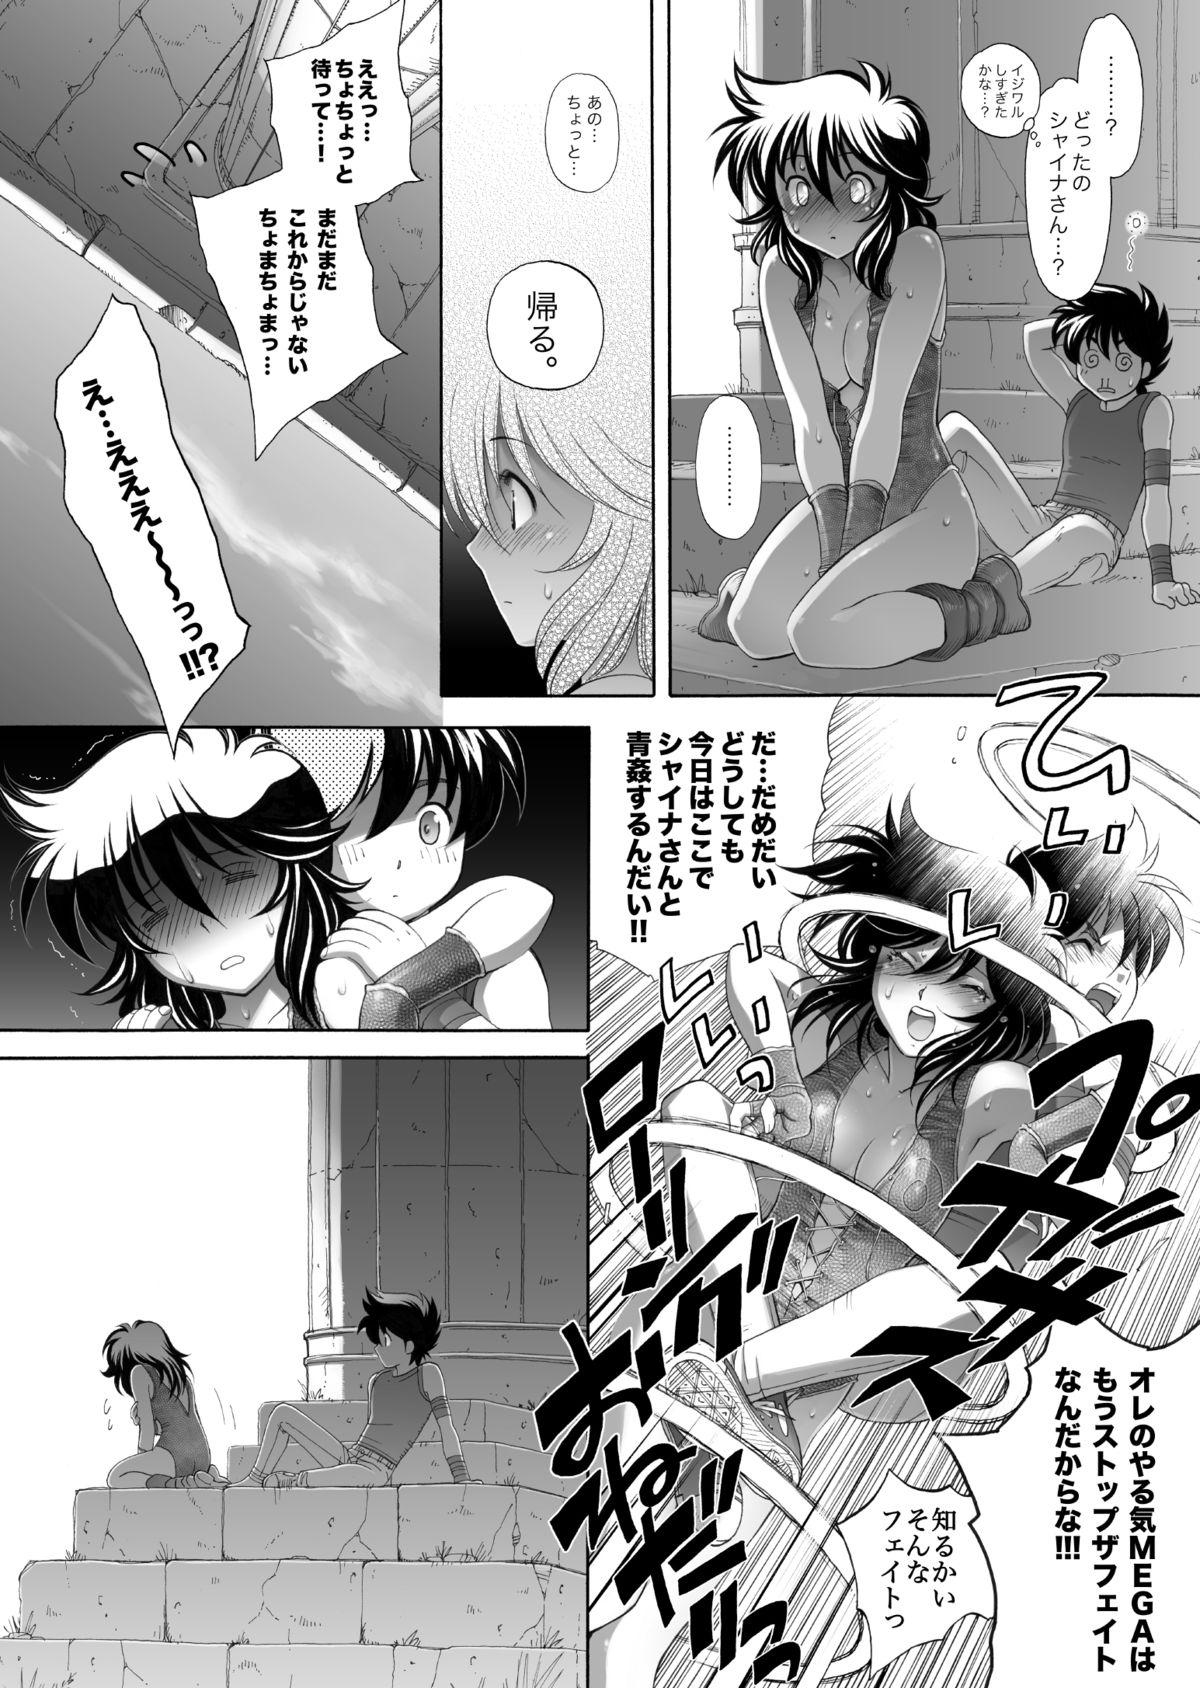 Hidden S.I.S.I.O.K.N.M.A. II - Saint seiya Defloration - Page 11